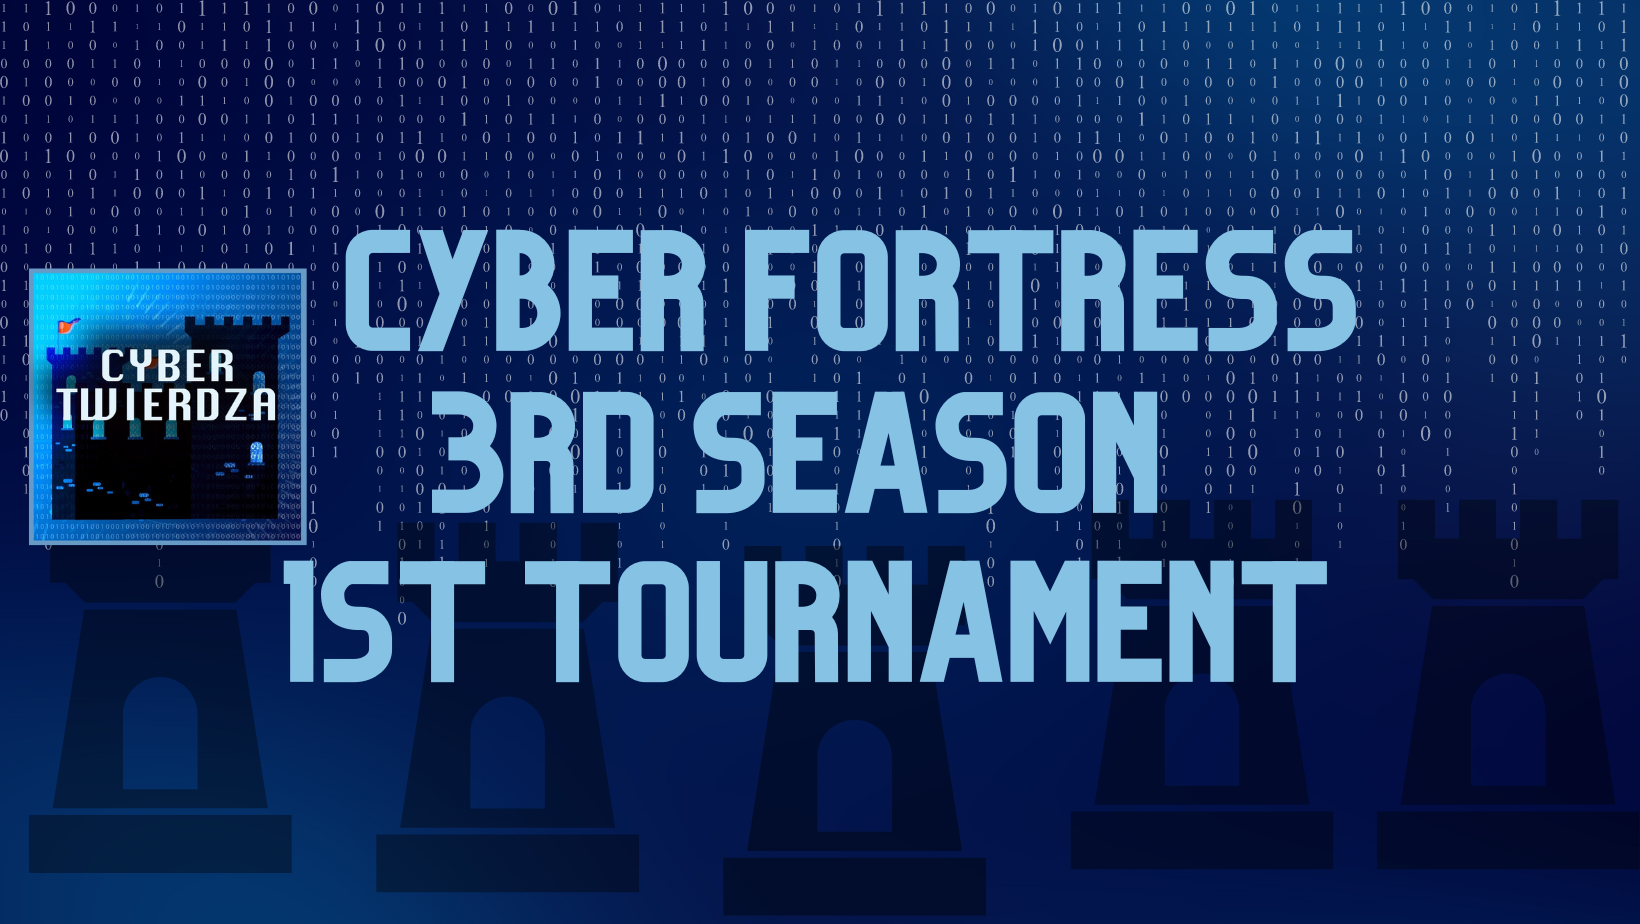 Summary of the 1st tournament of the 3rd season of the Cyber Fortress League